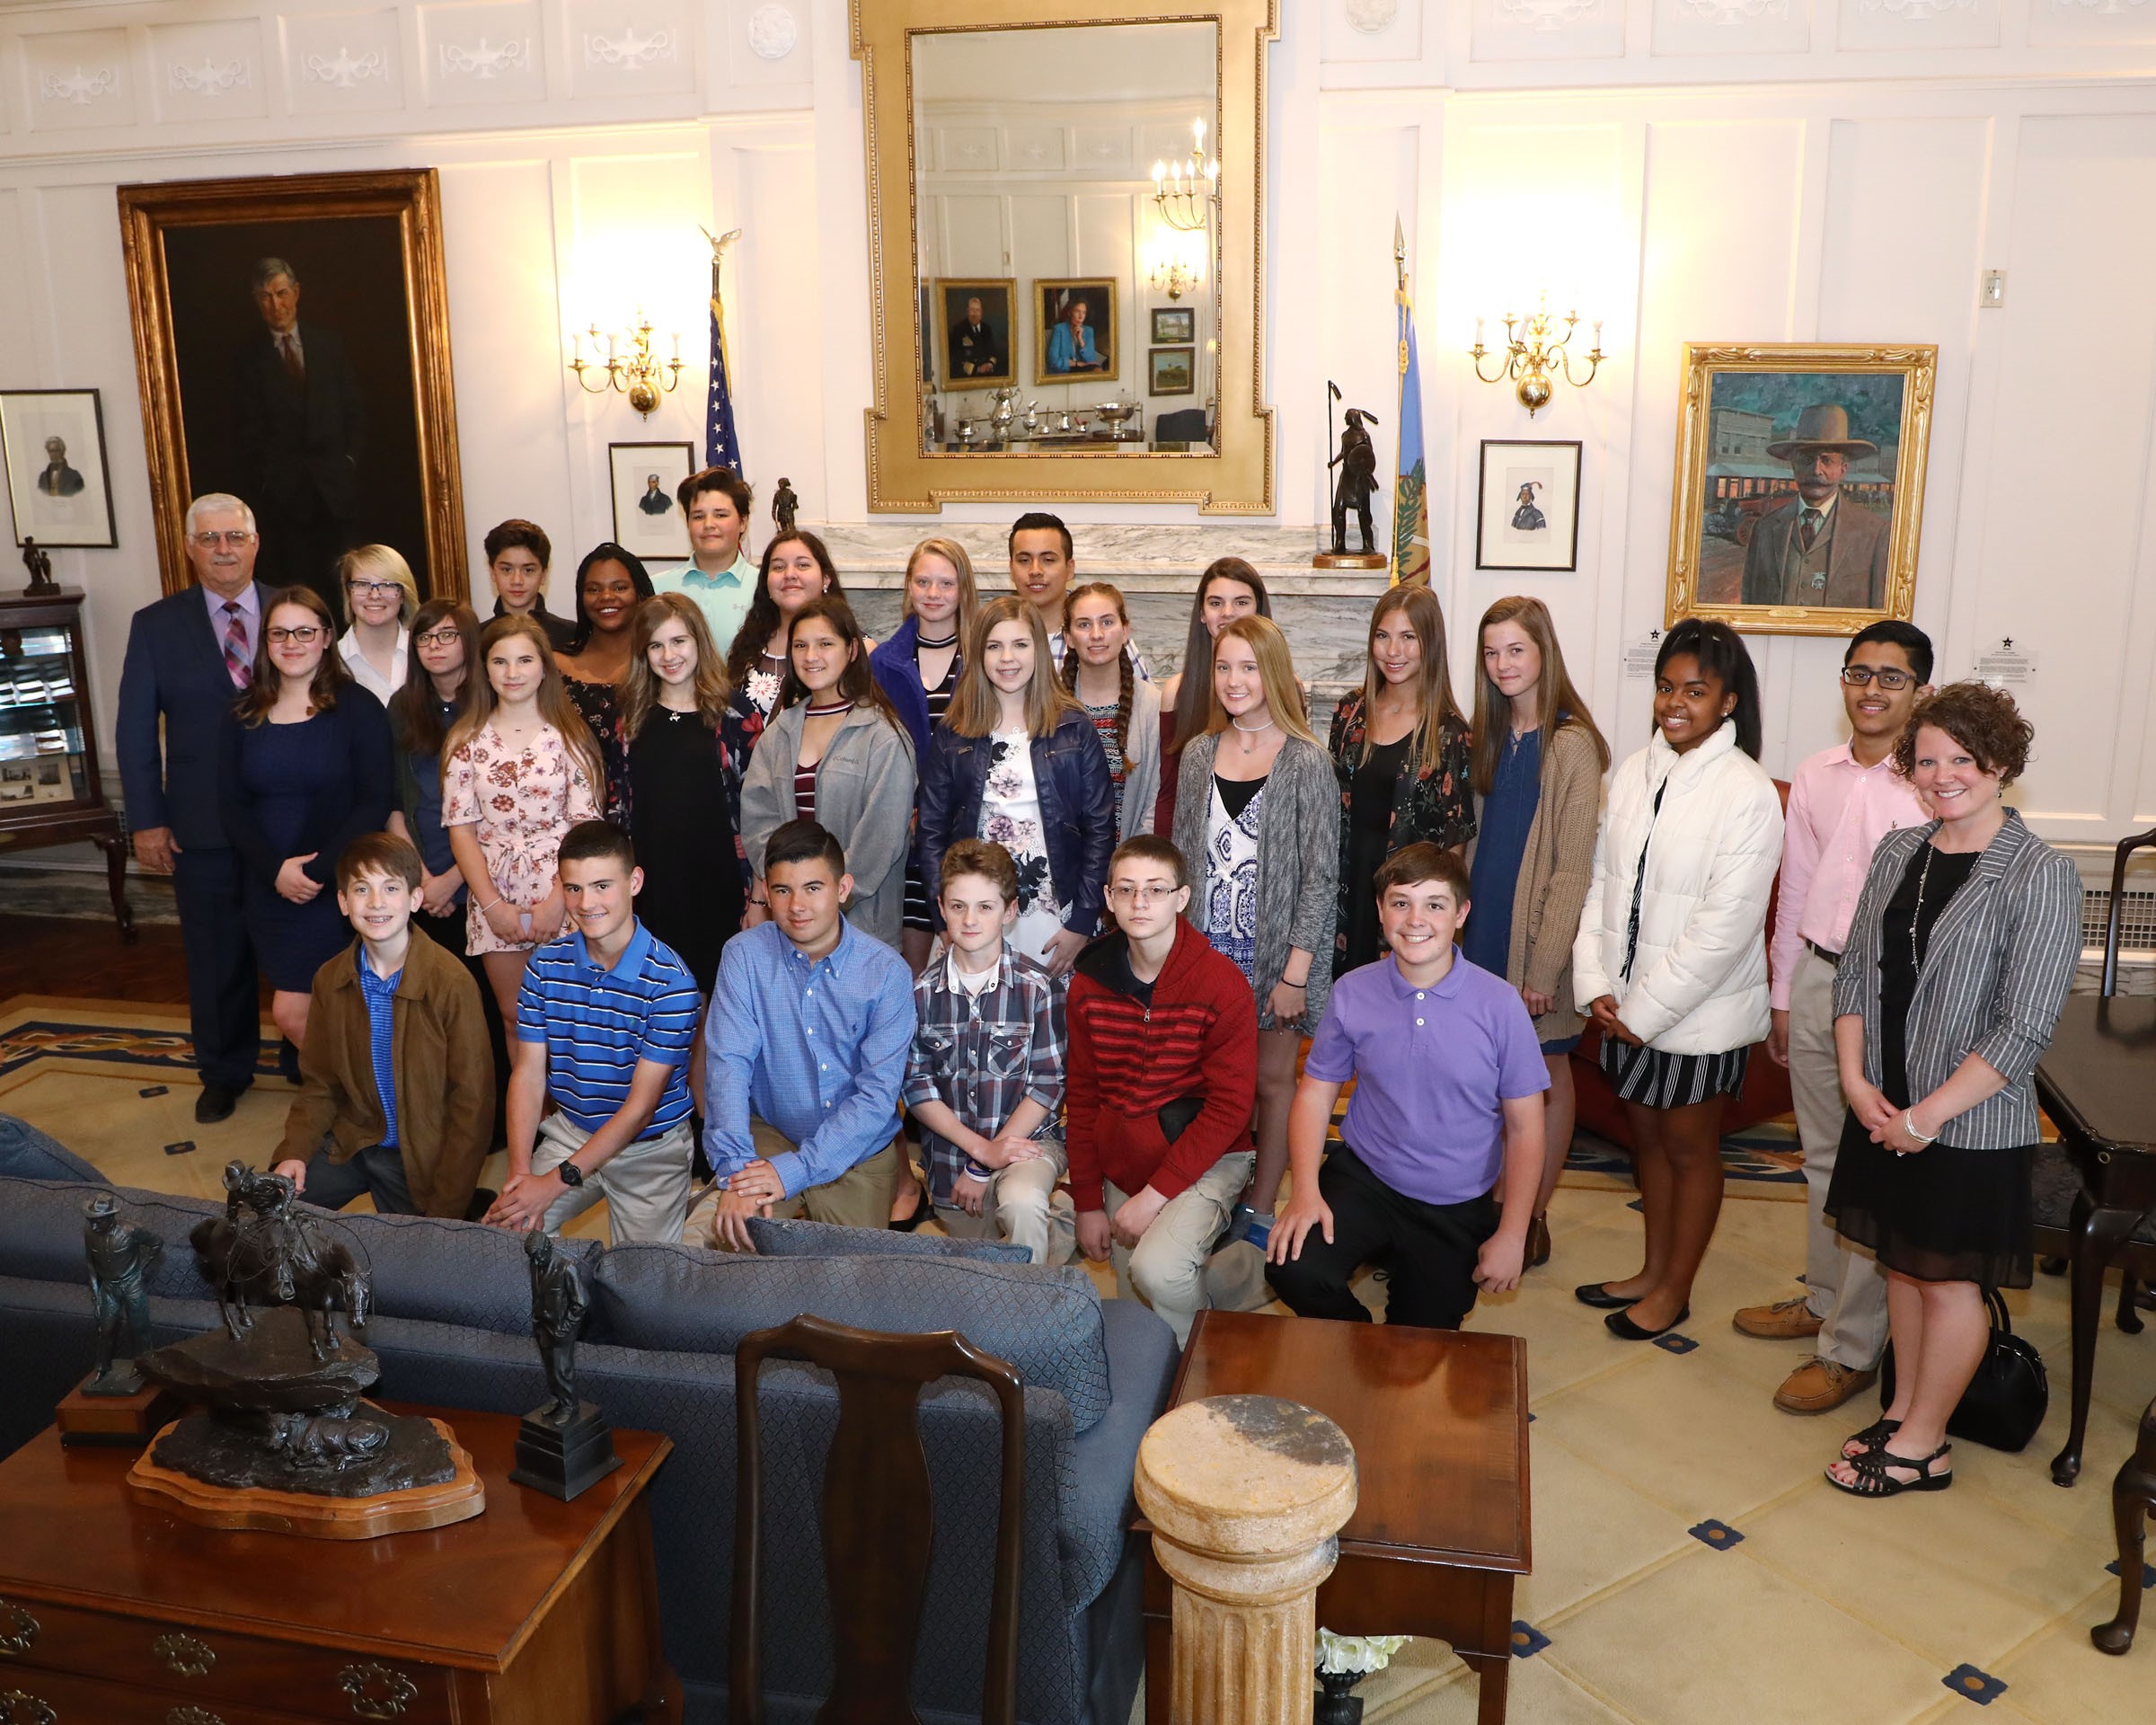 Senator Roland Pederson, R-Burlington, (left, back row) welcomes delegates from the National Junior Honor Society (NJHS) and Student Council (STUCO) last week at the State Capitol.  The student officers were joined by several other 8th grade students from DeWitt Waller Middle School, as well as principal Adam Beauchamp, NJHS sponsor Barbara Baker, STUCO Sponsor Dedra Fenley and Alan Siebel.